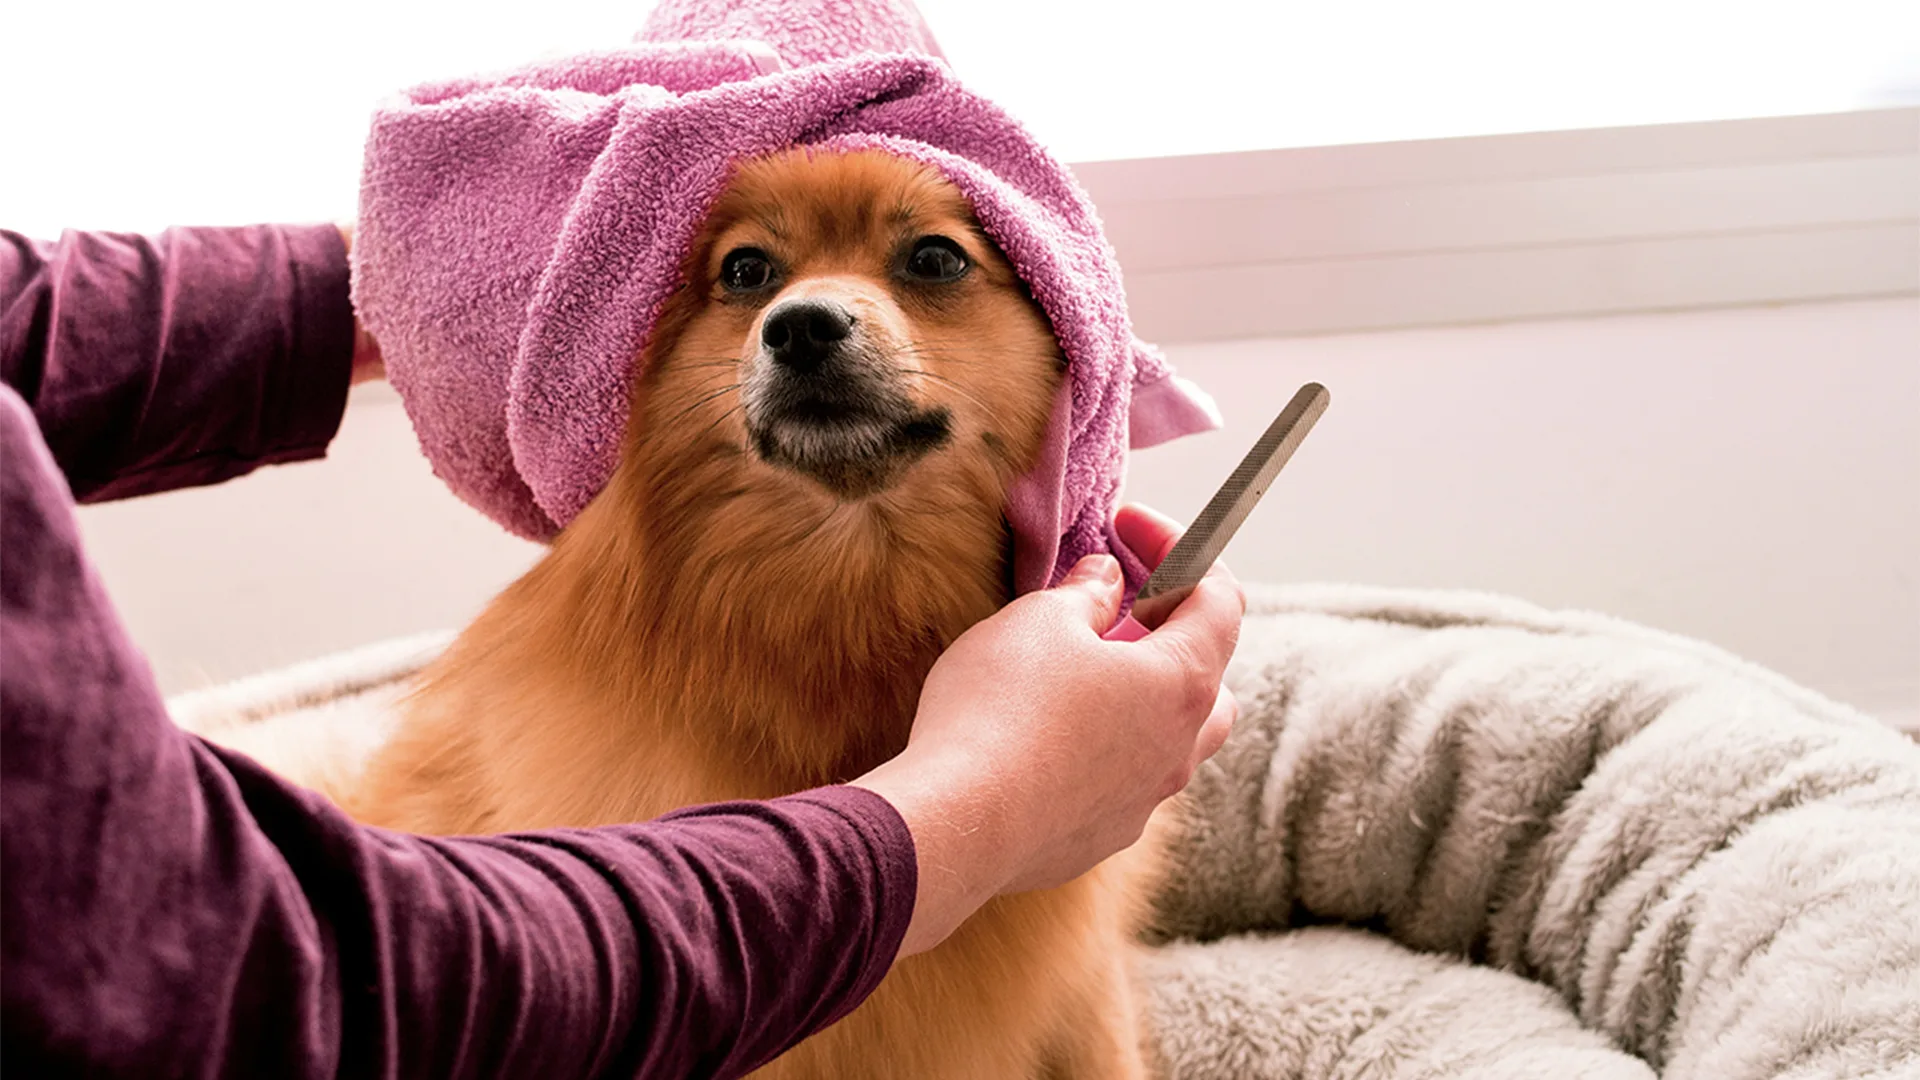 Dog with a towel on its head being groomed